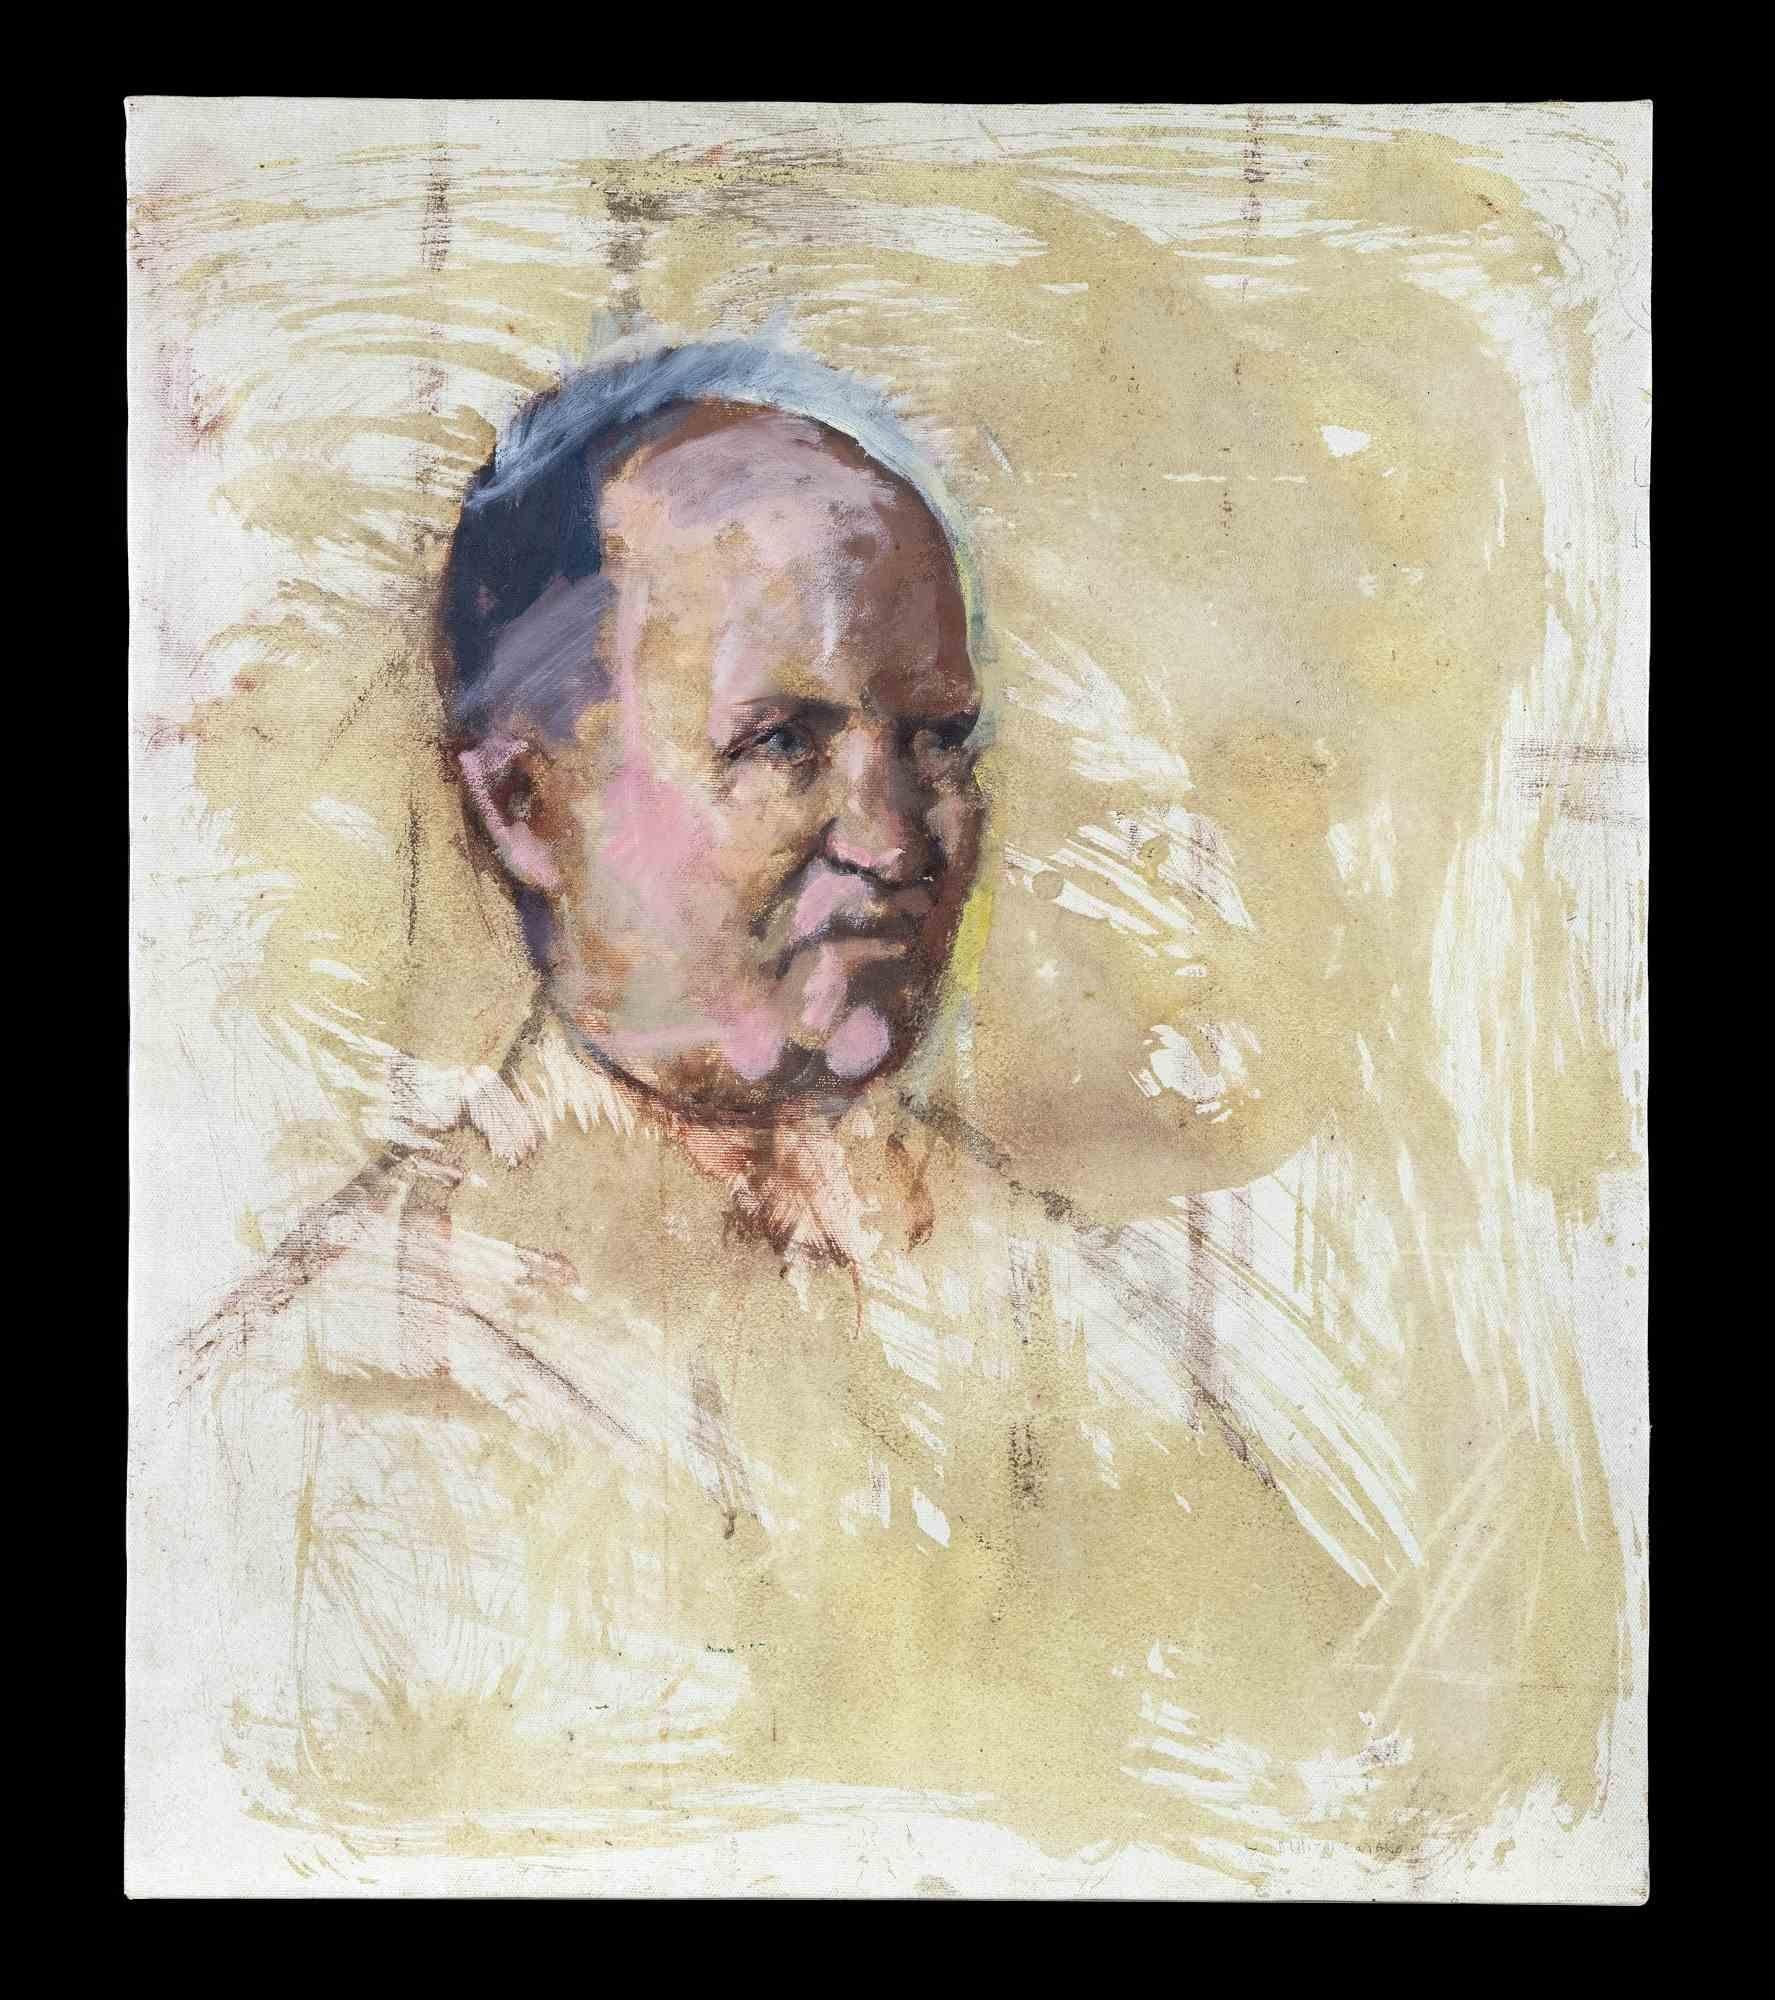 Portrait is an original modern artwork realized by Dimitri Godycki Cwirko (1901-1987).

Mixed colored oil painting on canvas.

Label on the back with details about the artwork.

